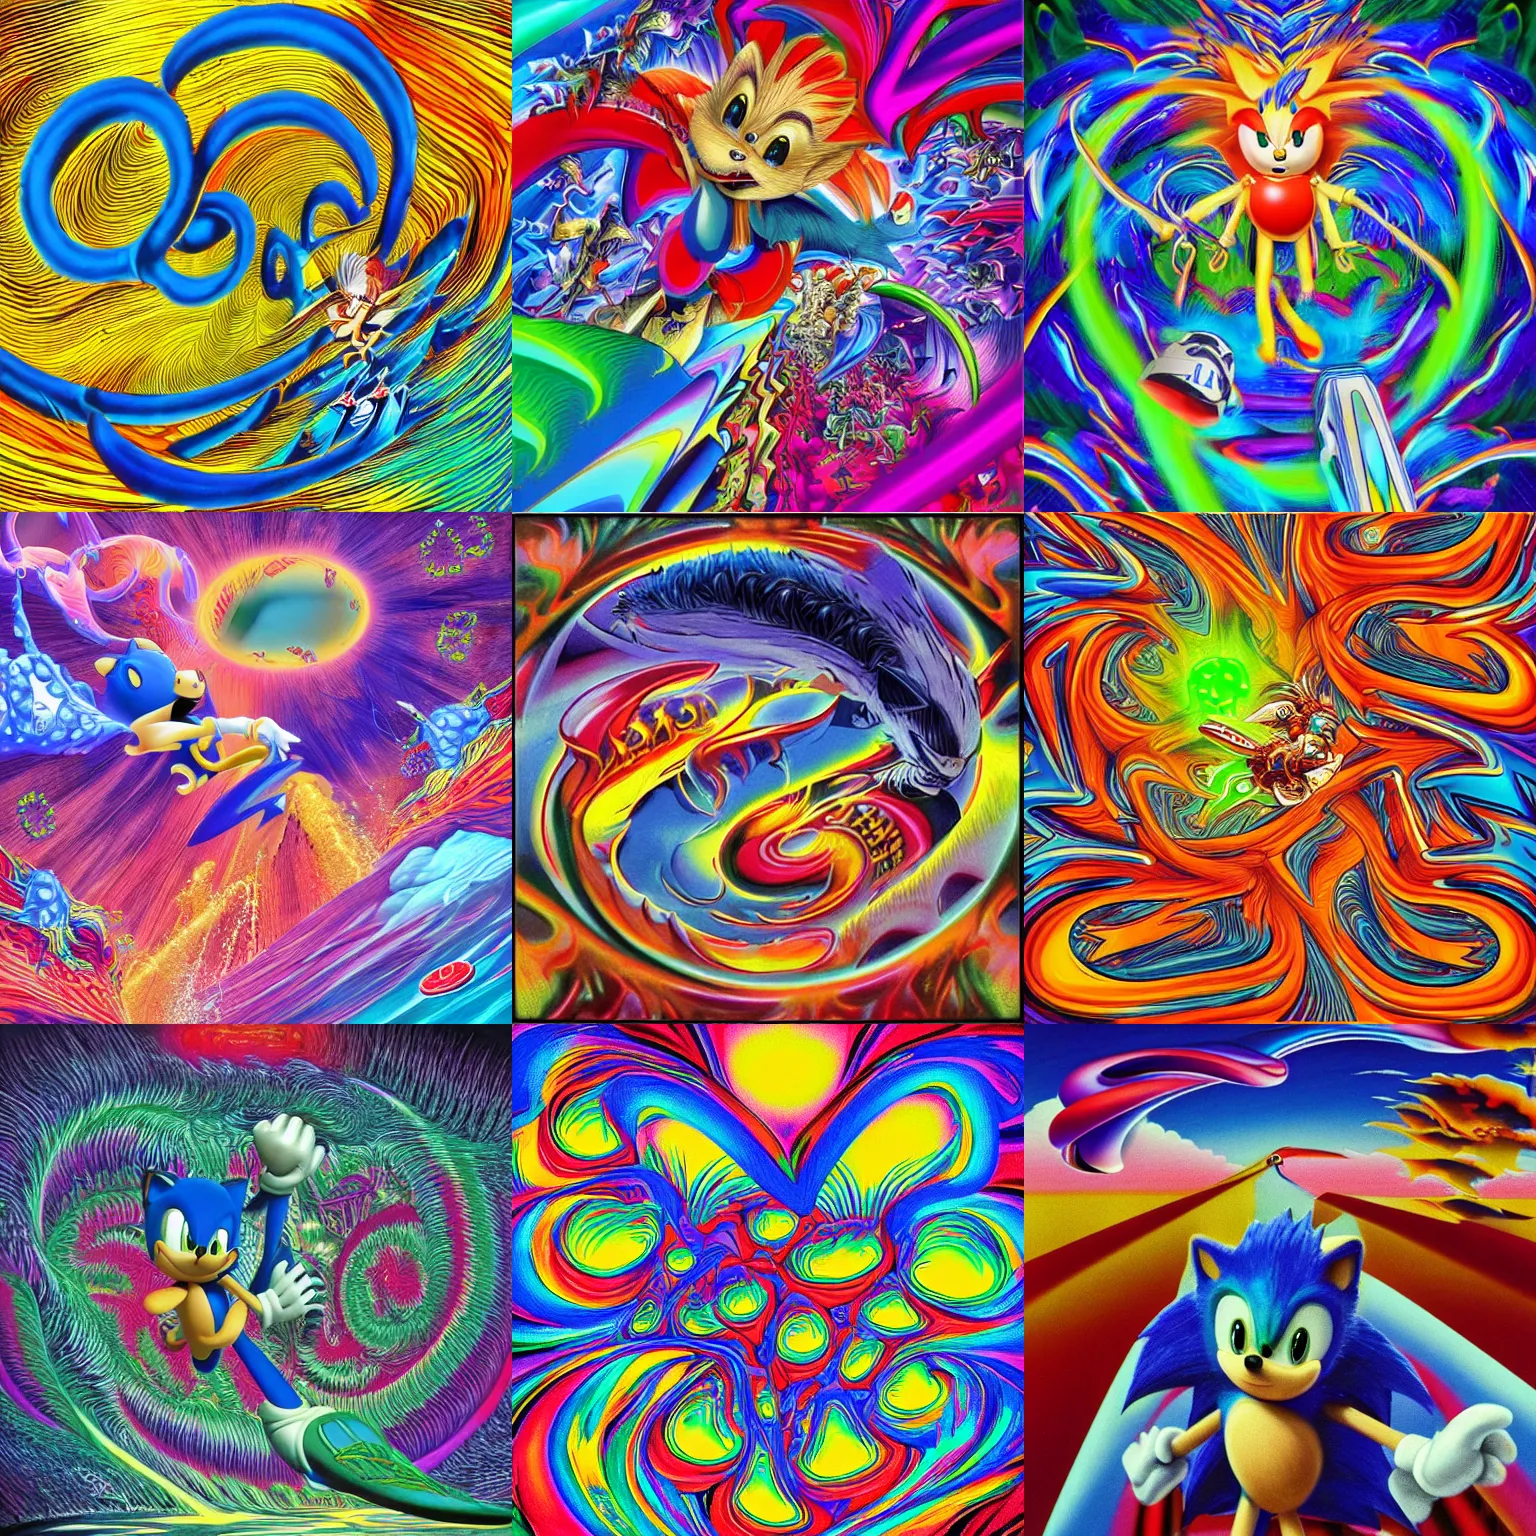 Prompt: surreal, sharp, detailed professional, high quality airbrush art mgmt album cover of a liquid dissolving lsd dmt sonic the hedgehog surfing through cyberspace, mandelbrot pattern, 1 9 9 0 s 1 9 9 2 sega genesis video game album cover